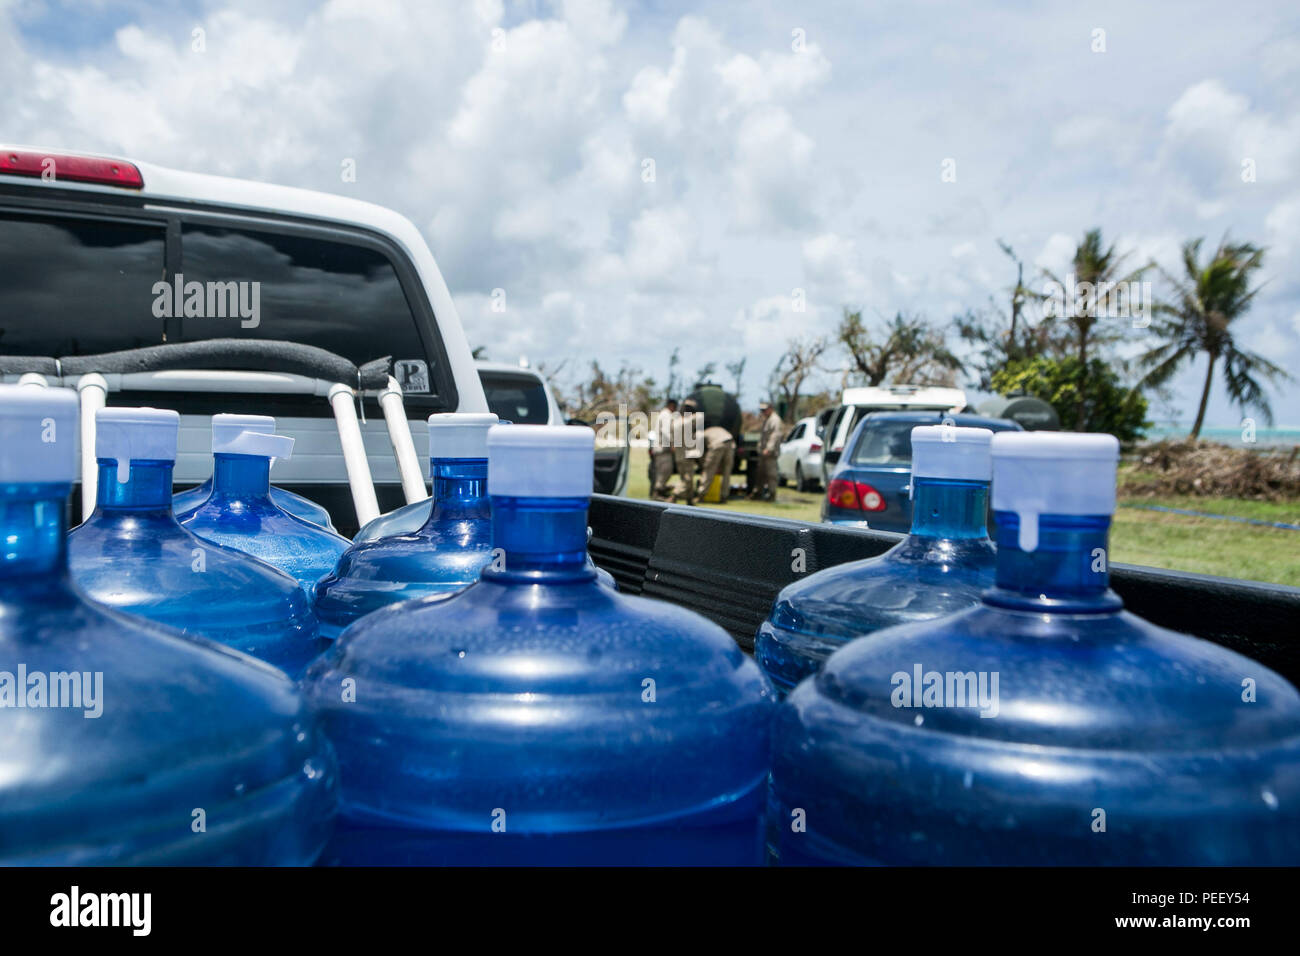 U.S. Marines with Combat Logistics Battalion 31, 31st Marine Expeditionary Unit, distribute water to local civilians as part of typhoon relief efforts in Saipan, Aug. 12, 2015. The 31st MEU and the ships of the Bonhomme Richard Amphibious Ready Group are assisting the Federal Emergency Management Agency with distributing emergency relief supplies to Saipan after the island was struck by Typhoon Soudelor Aug. 2-3. (U.S. Marine Corps photo by Lance Cpl. Brian Bekkala/Released) Stock Photo